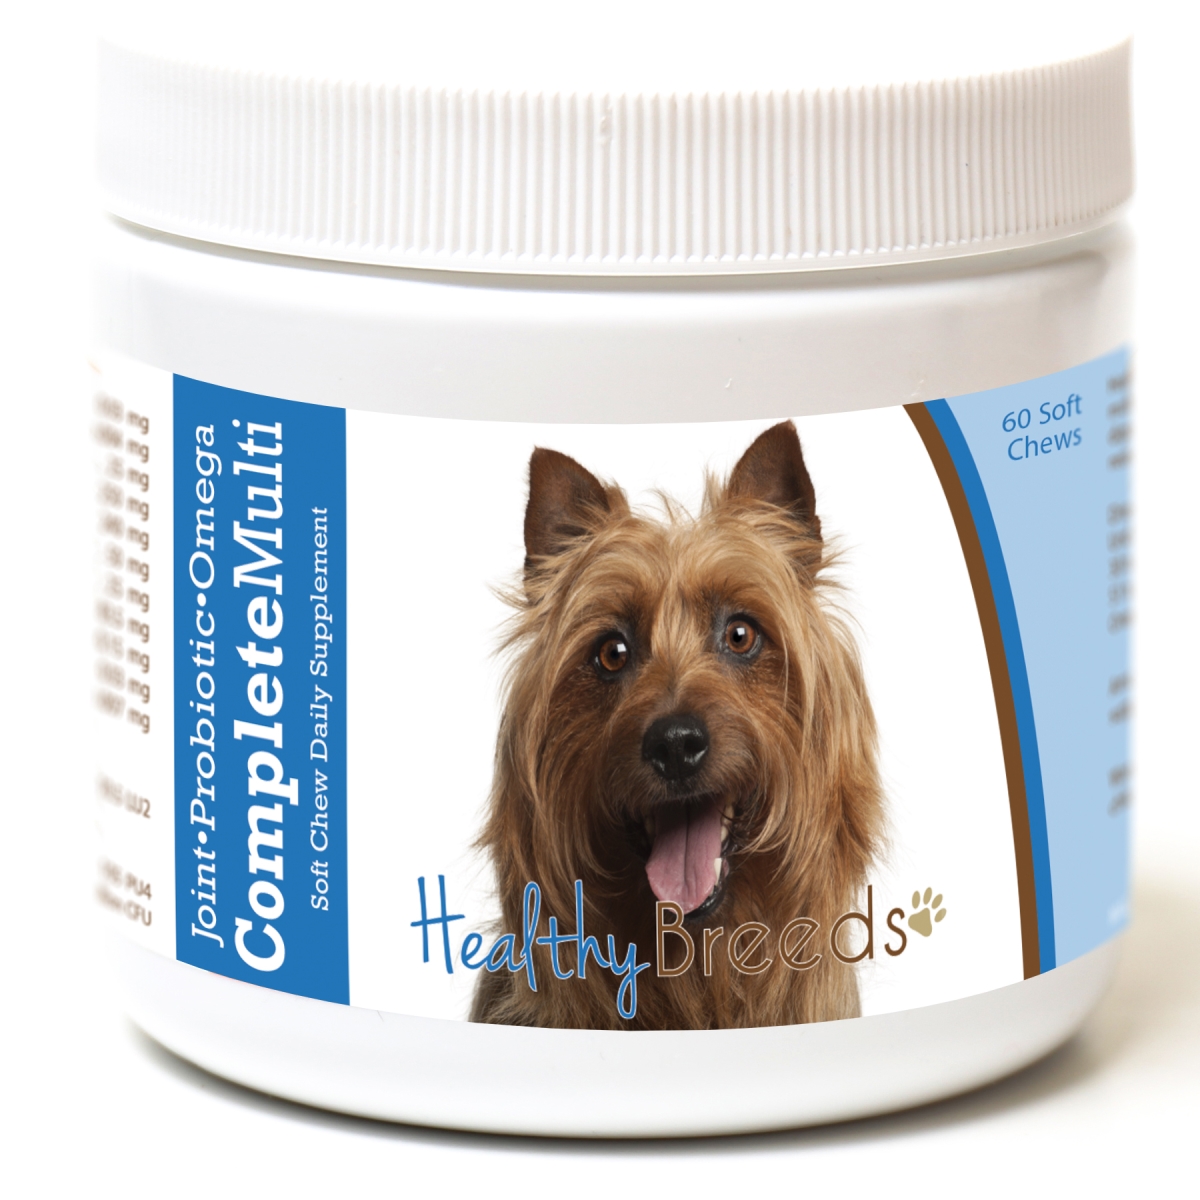 Picture of Healthy Breeds 192959007282 Australian Terrier All in One Multivitamin Soft Chew - 60 Count